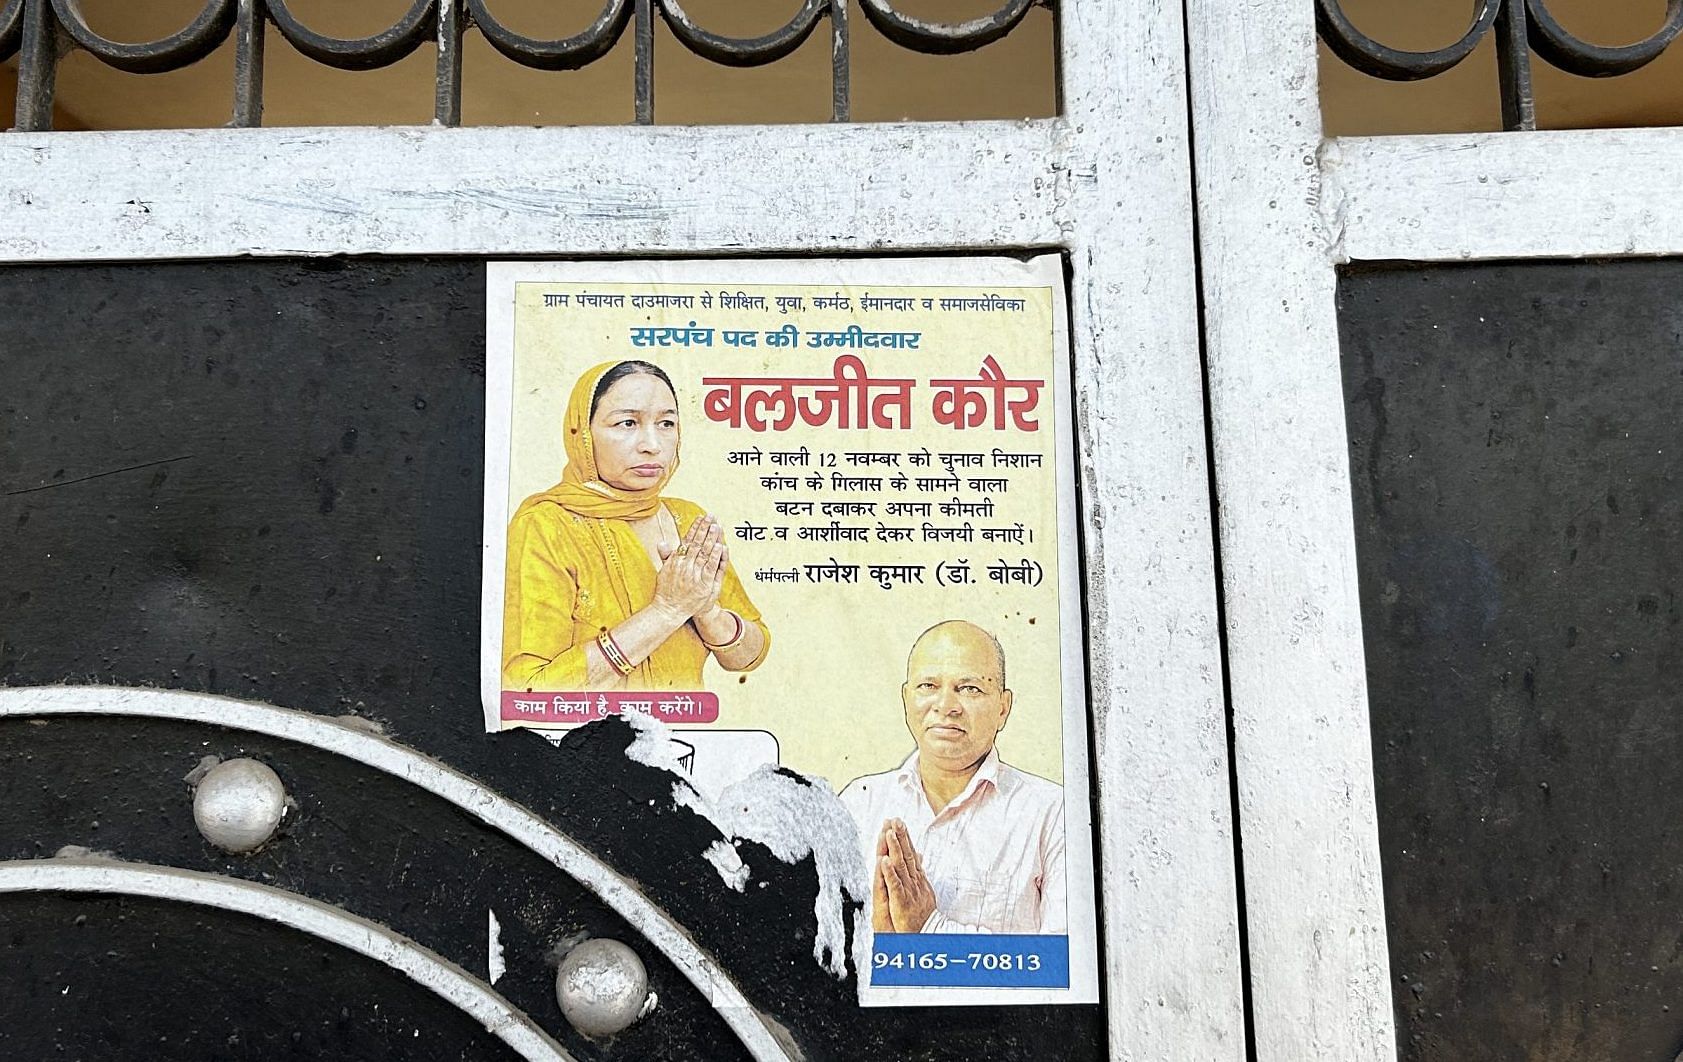 Baljit Kaur’s poster from her election campaign as a newly elected head in Karnal district. She also opposes the new e-tender policy | Jyoti Yadav